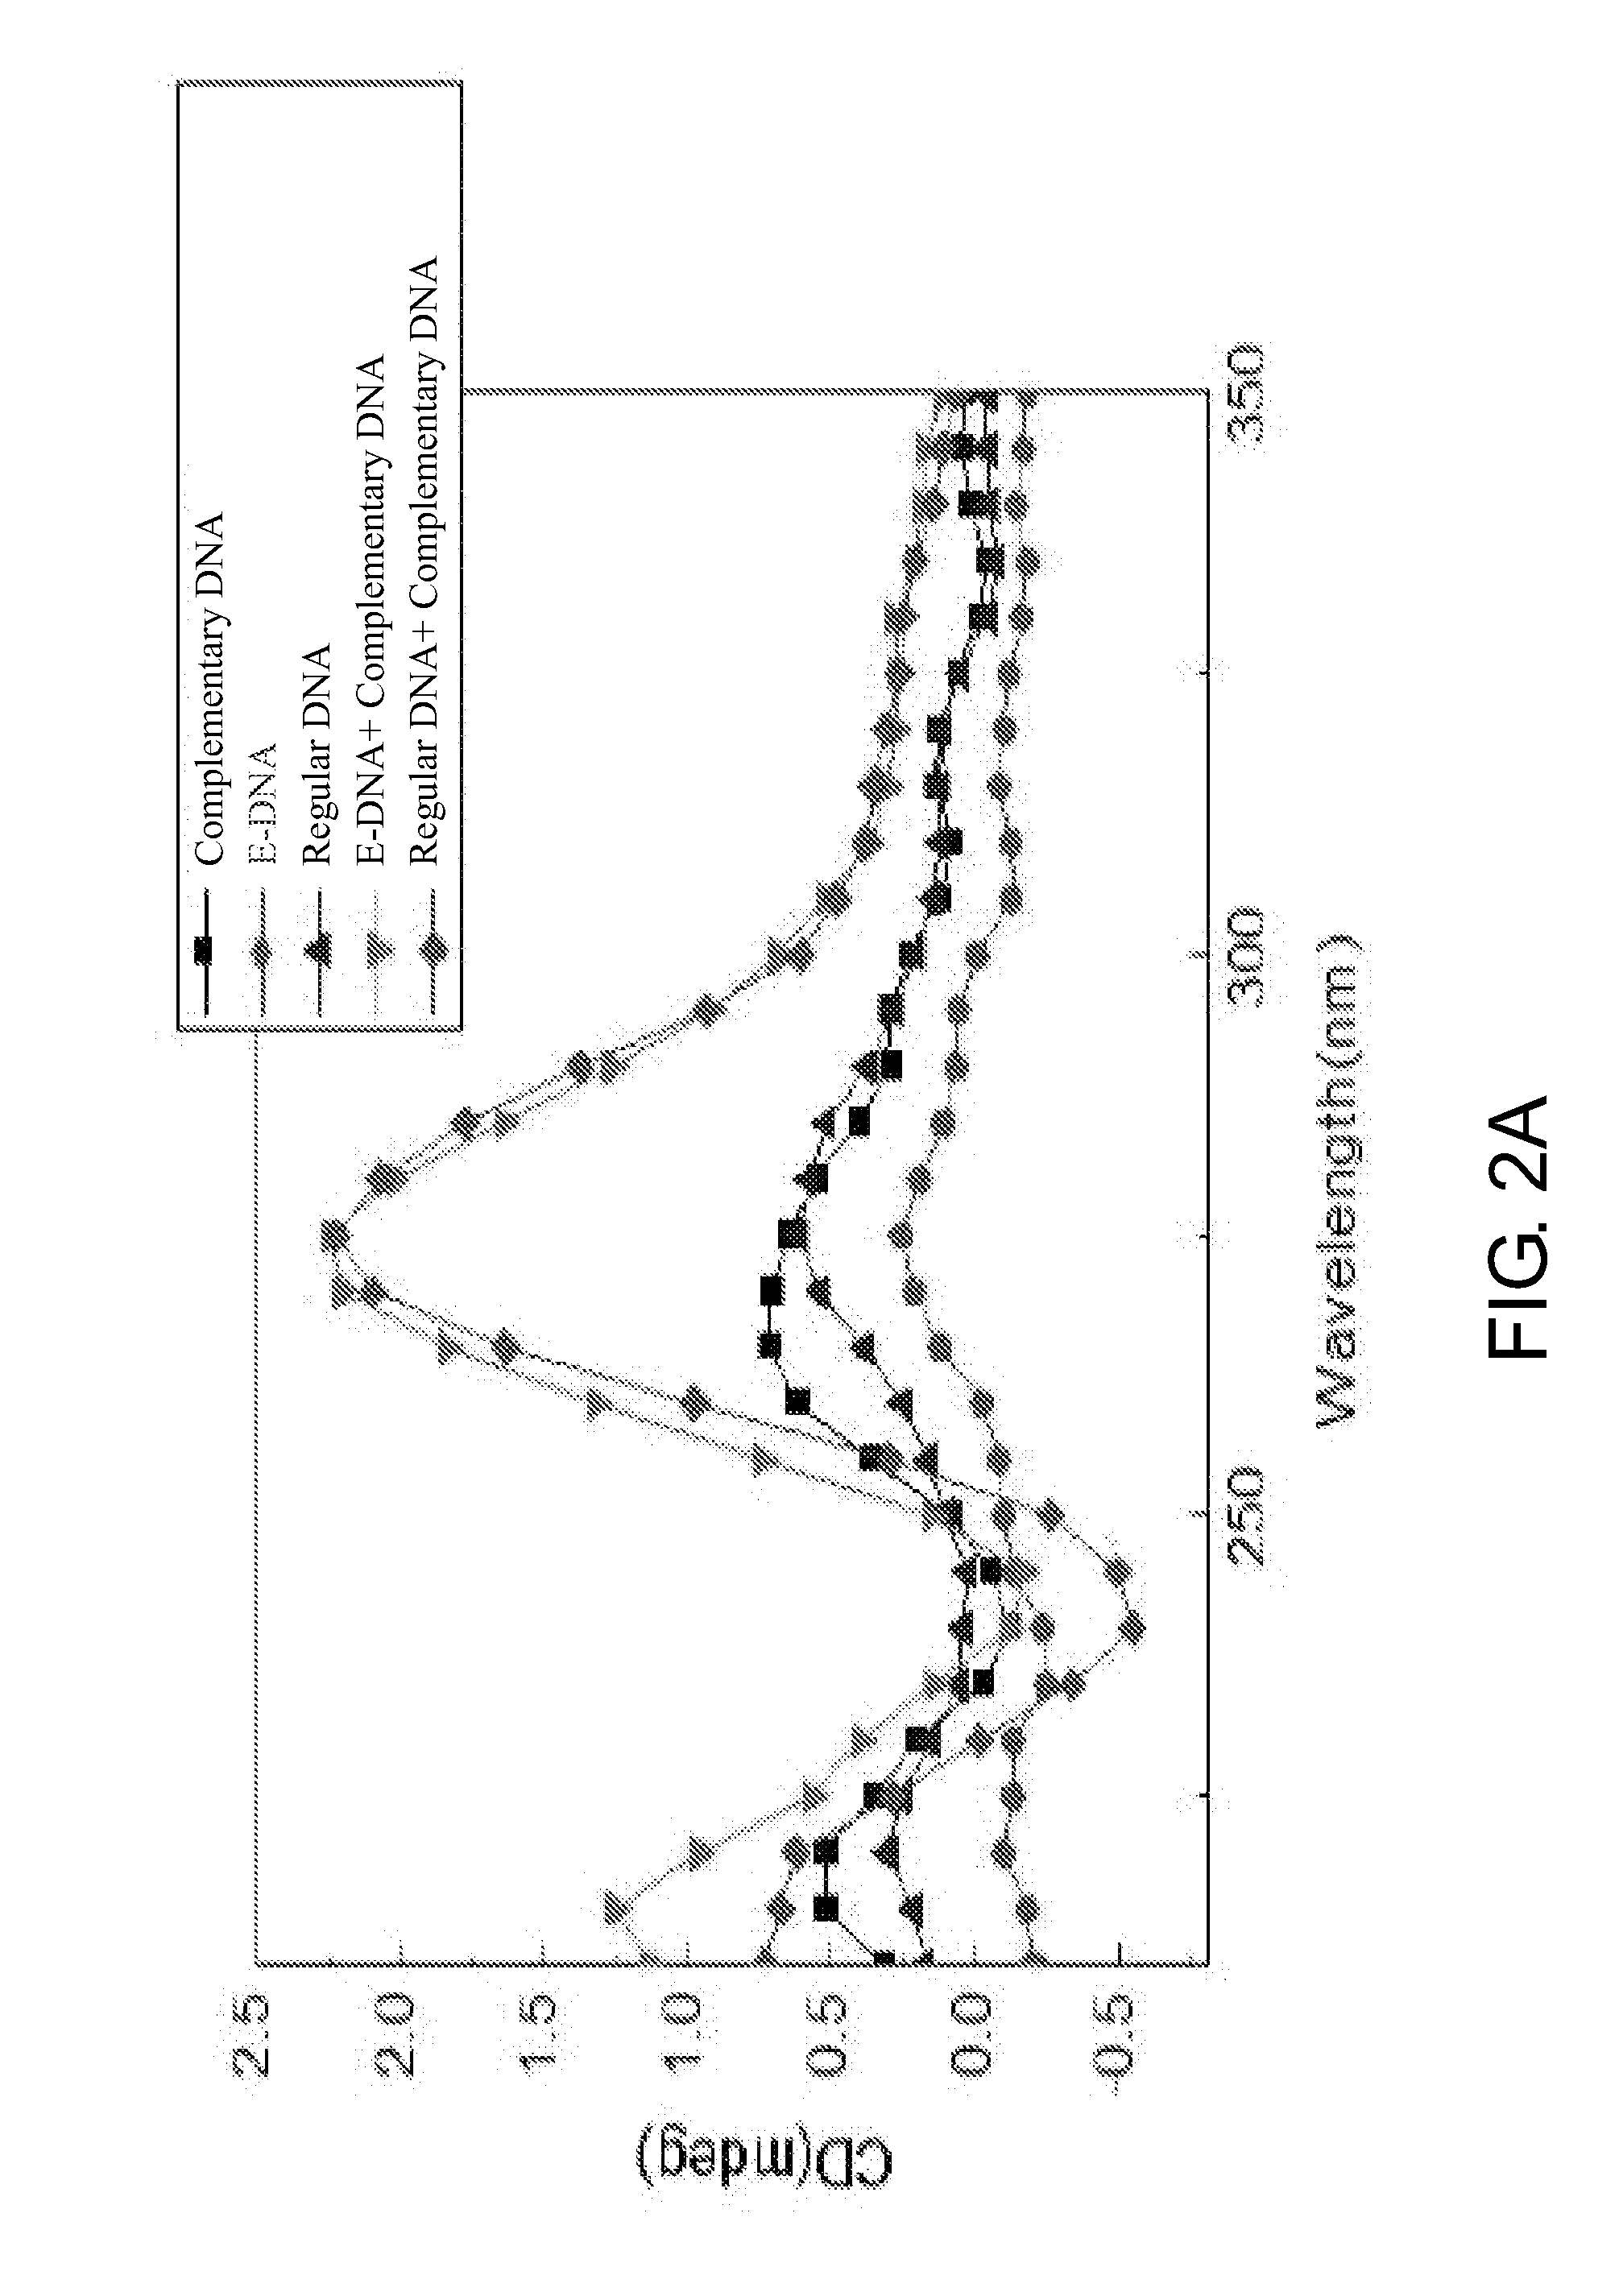 Method of using neutrilized DNA (n-DNA) as surface probe for high throughput detection platform